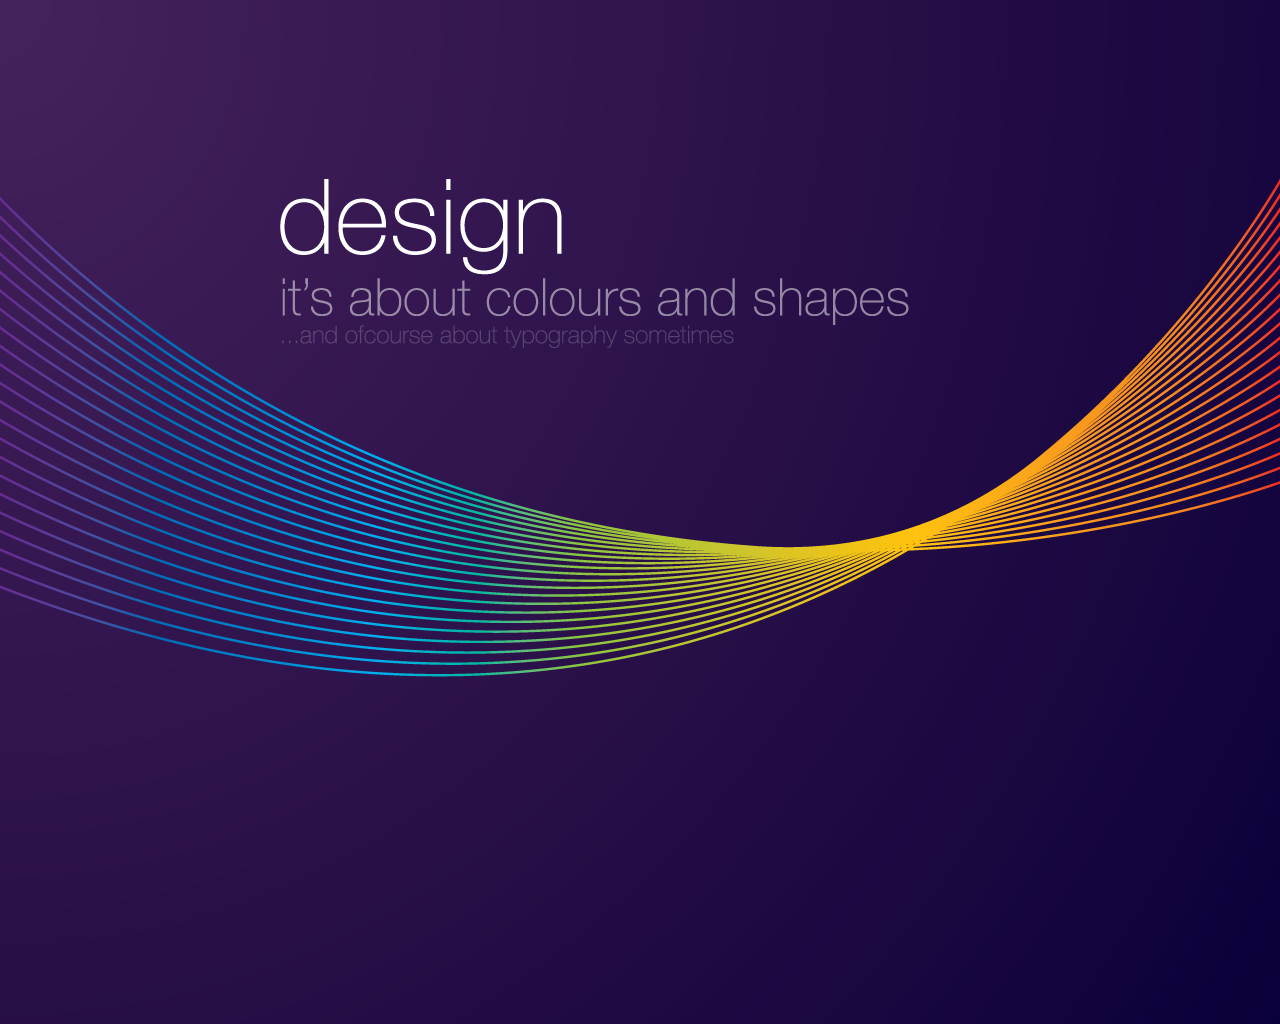 Image Wallpaper Designs Design Is All About Colors And Shapes Png